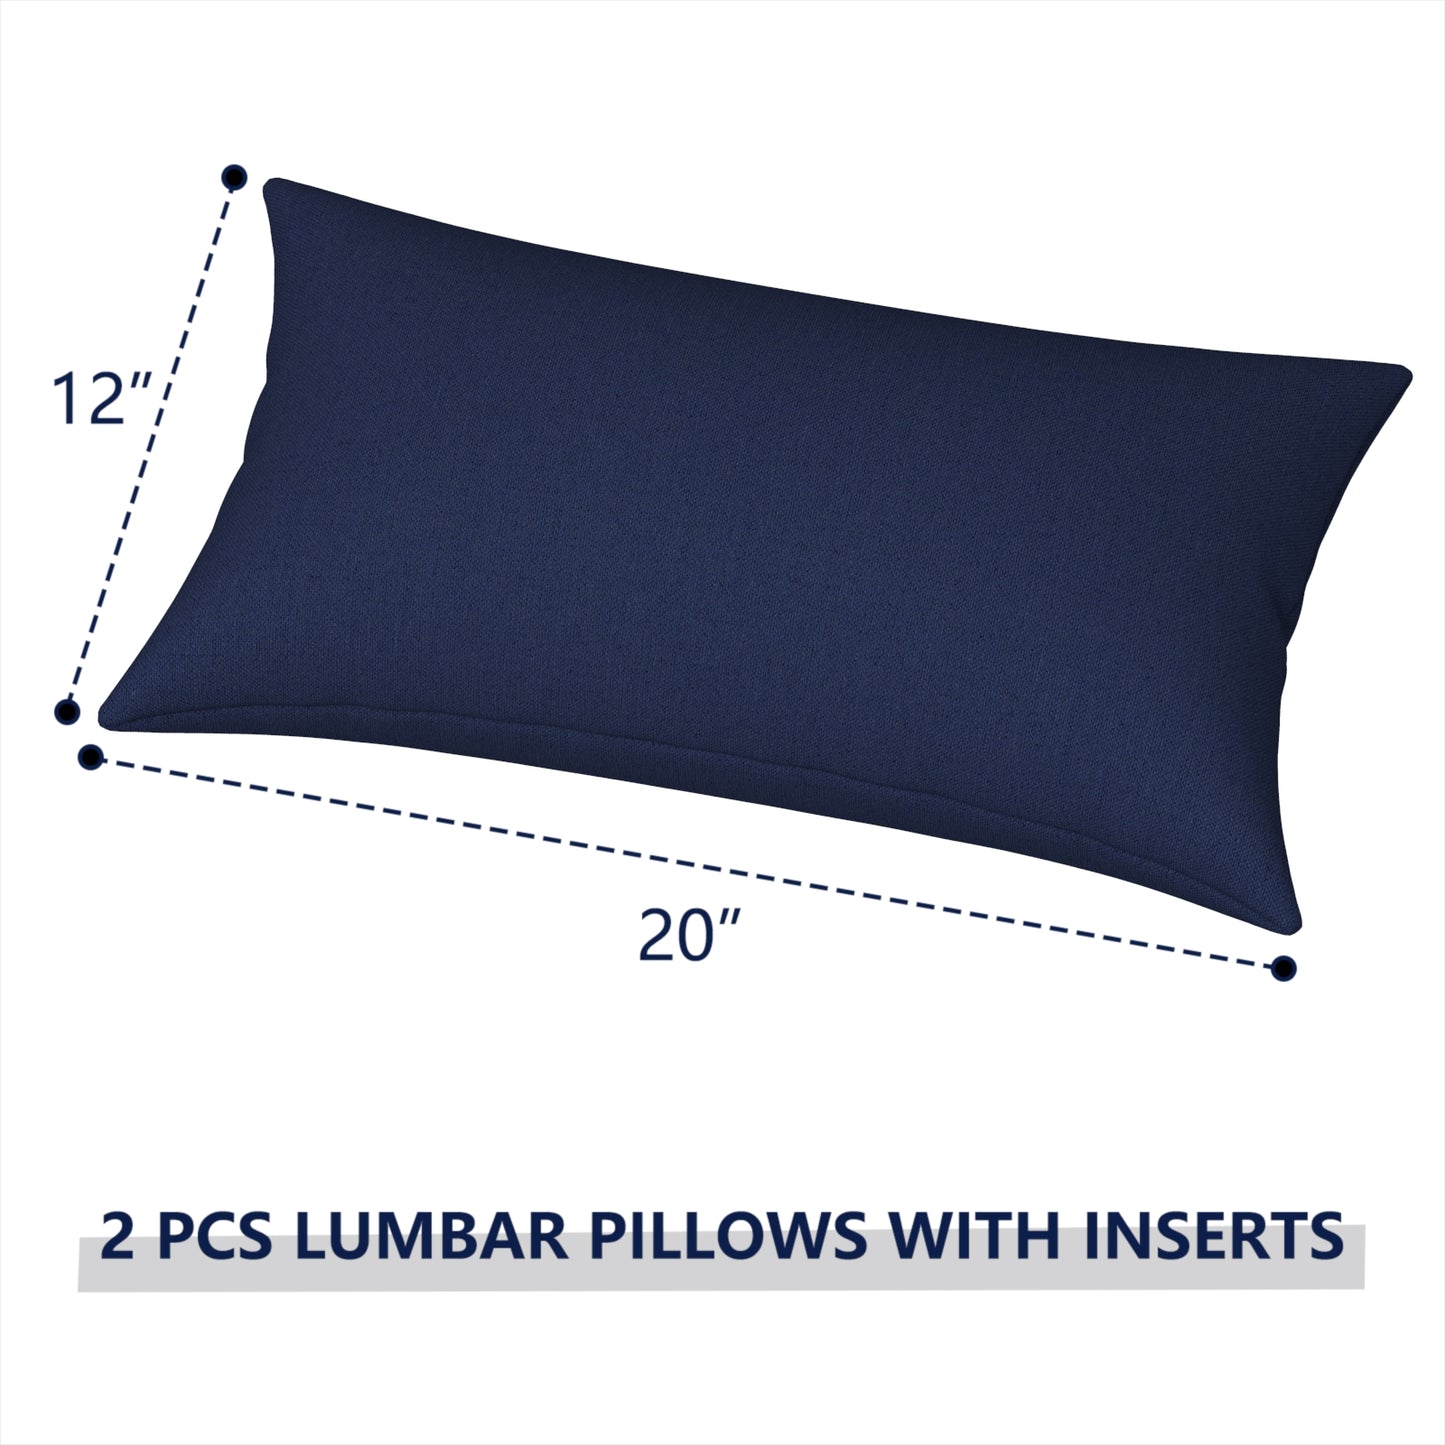 Melody Elephant Outdoor/Indoor Lumbar Pillows, Water Repellent Cushion Pillows, 12x20 Inch, Outdoor Pillows with Inserts for Home Garden, Pack of 2, Navy Blue